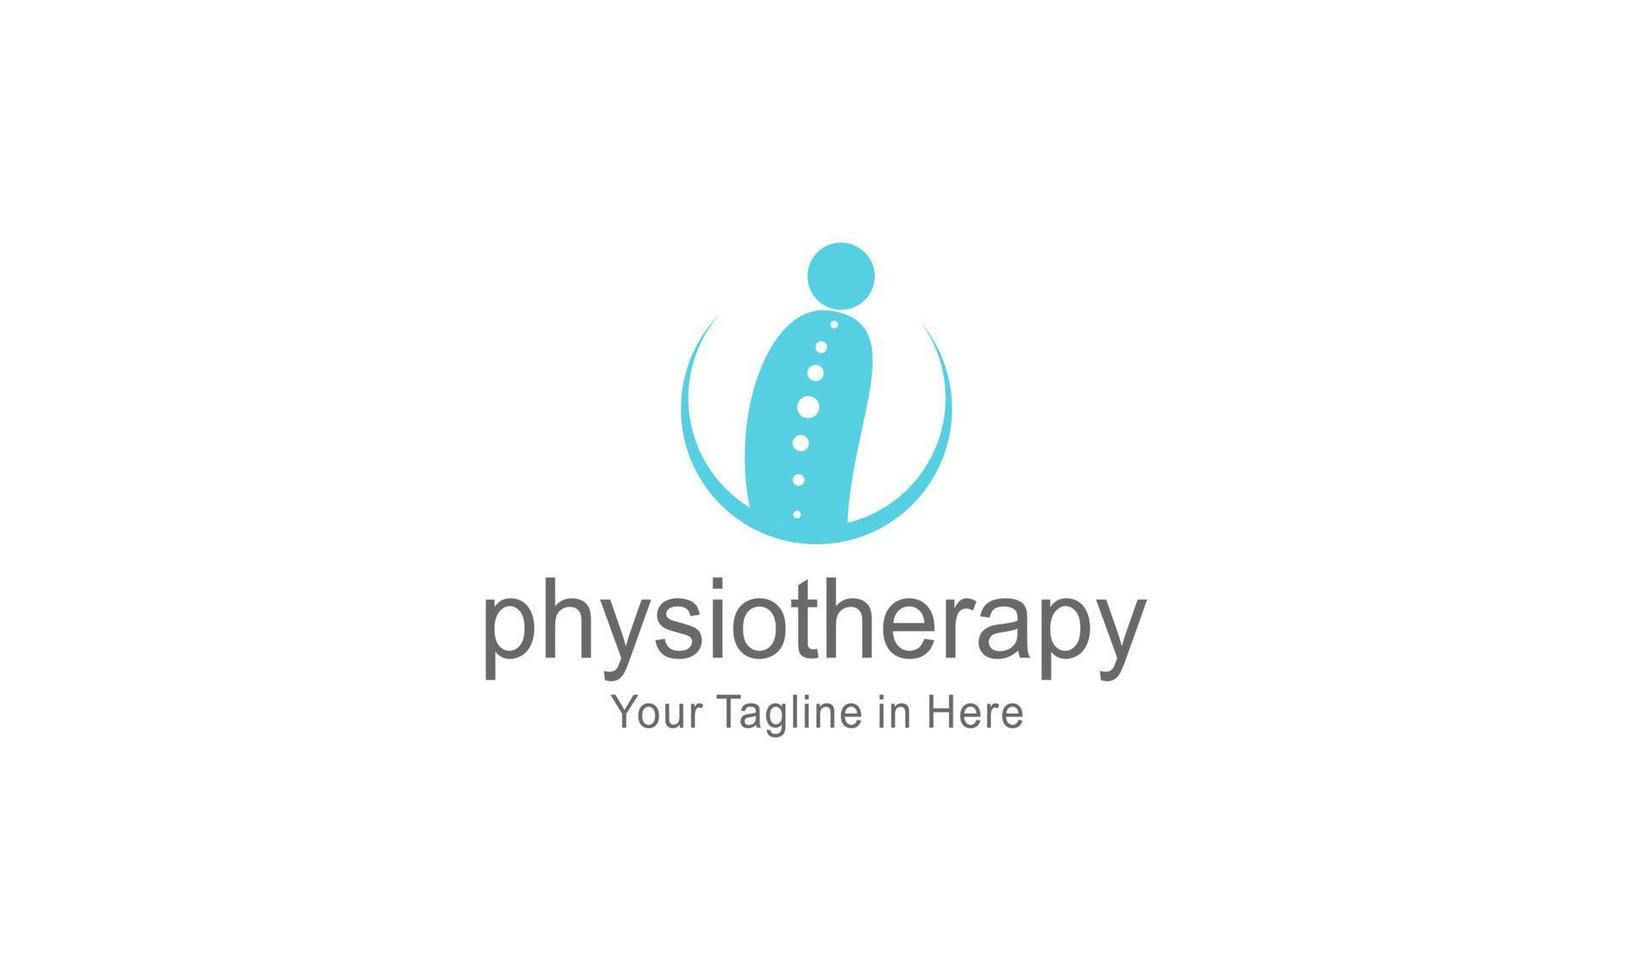 Physical therapy logo design, medical health wellness vector